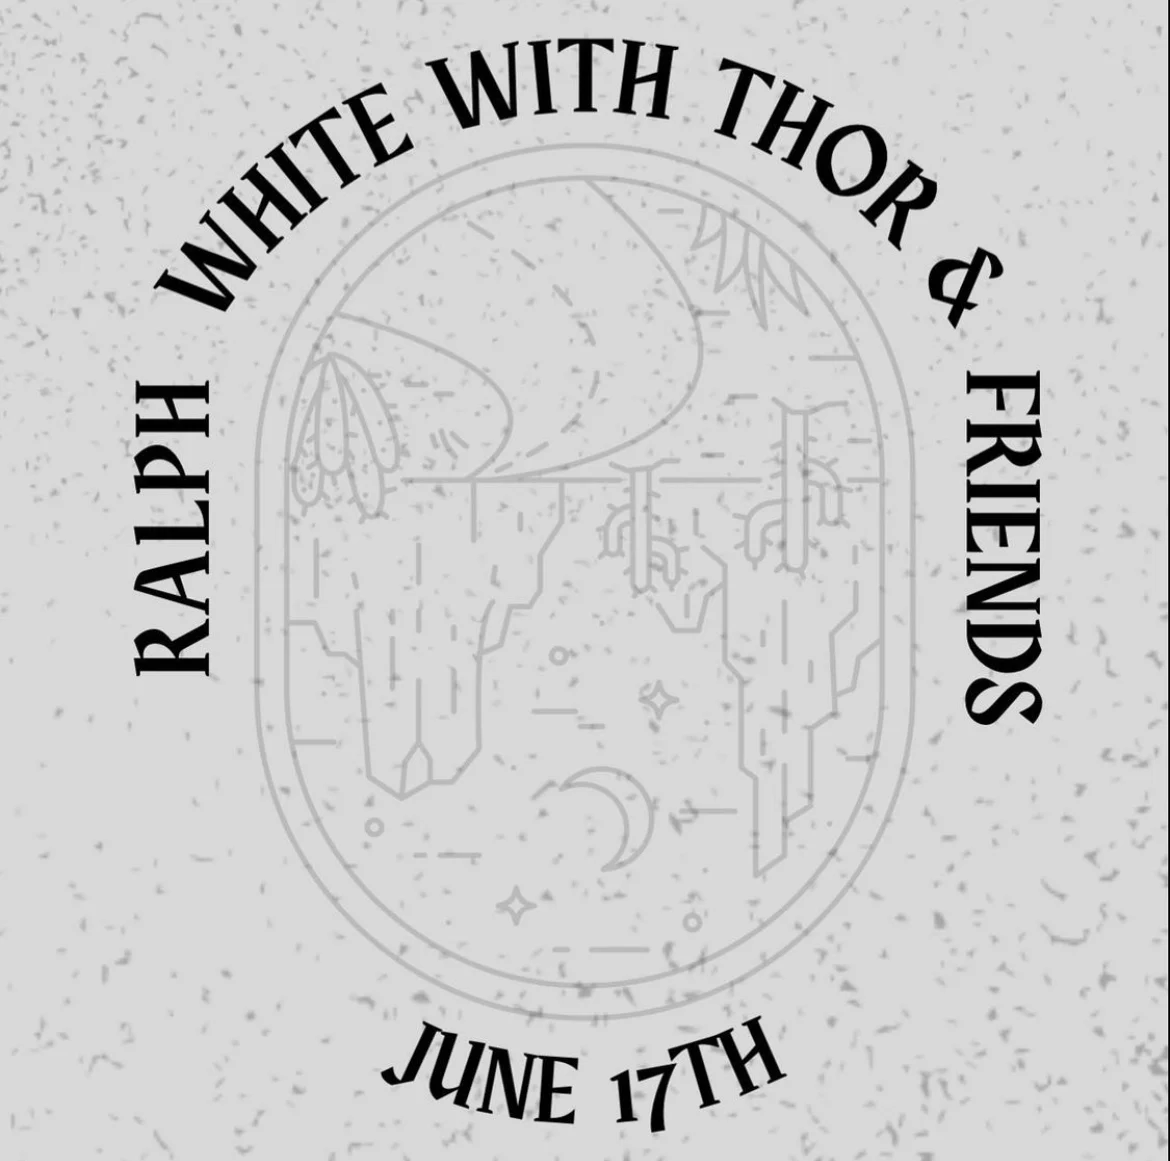 Ralph White with Thor & Friends, June 17th.